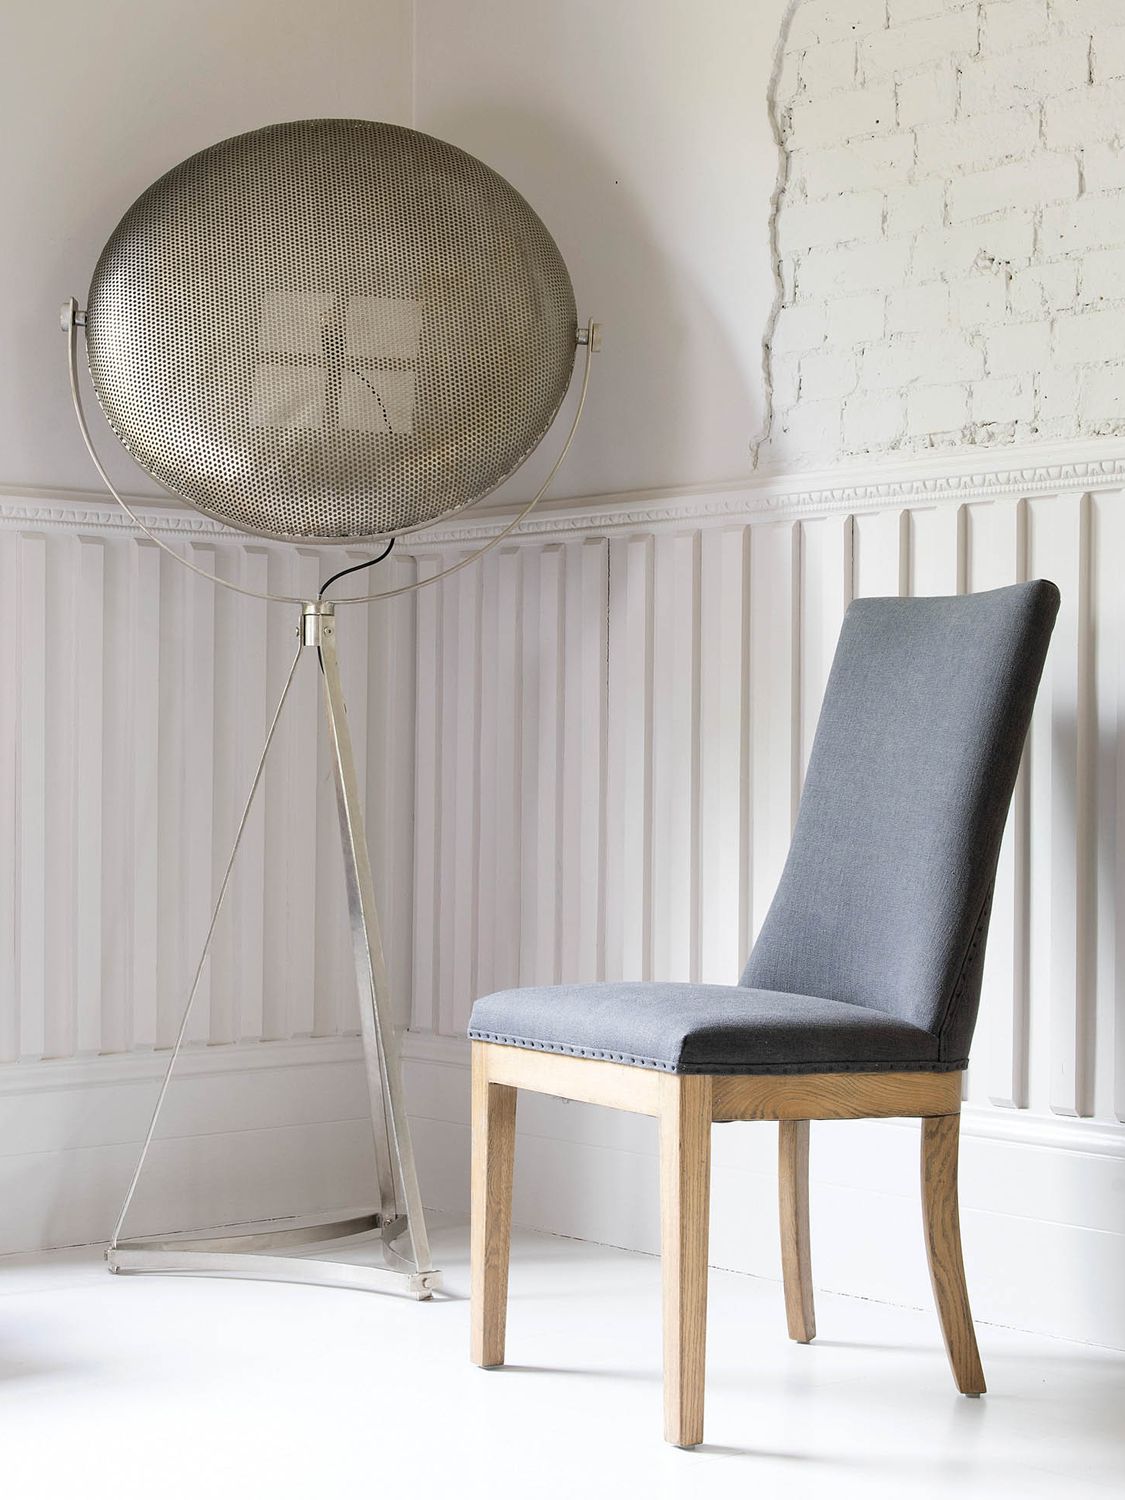 Photo of One.world st james linen & oak wood dining chair charcoal